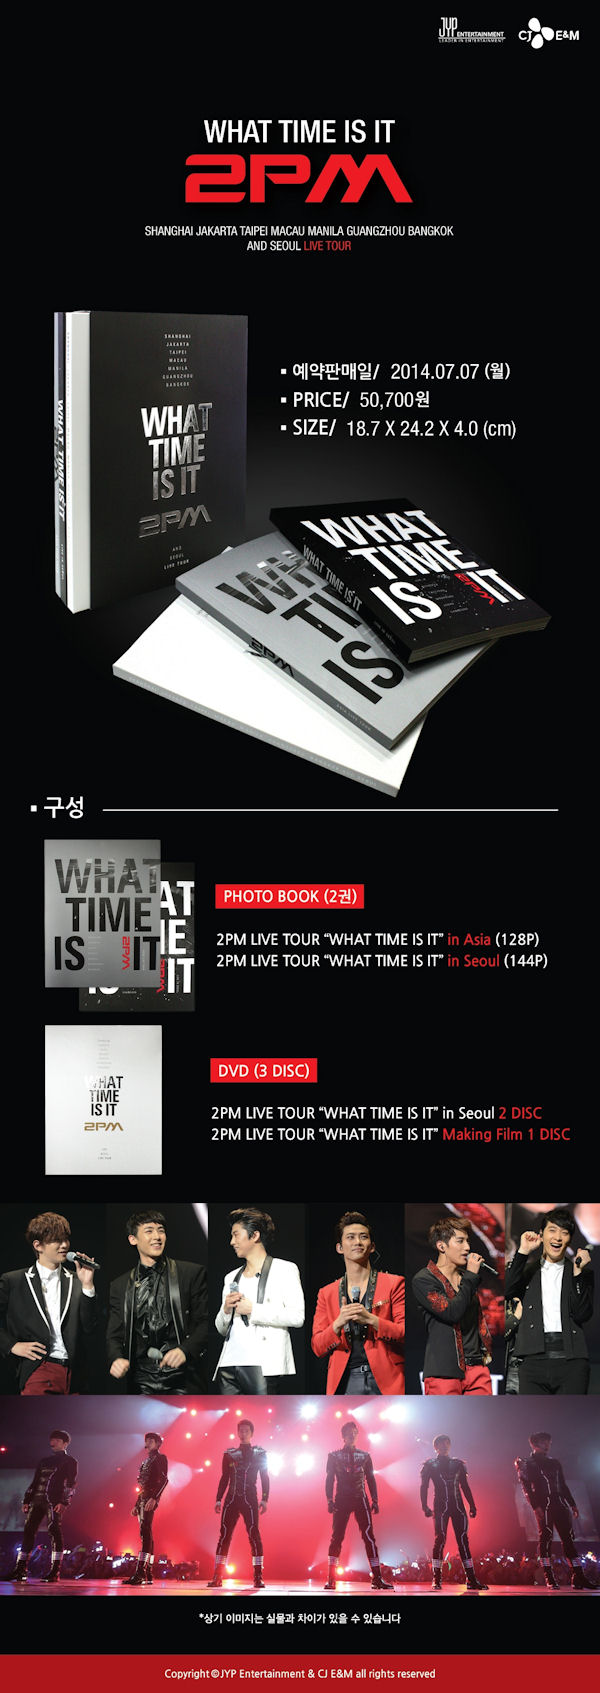 WHAT TIME IS IT 2PM TOUR DVD 写真集セットジュノ